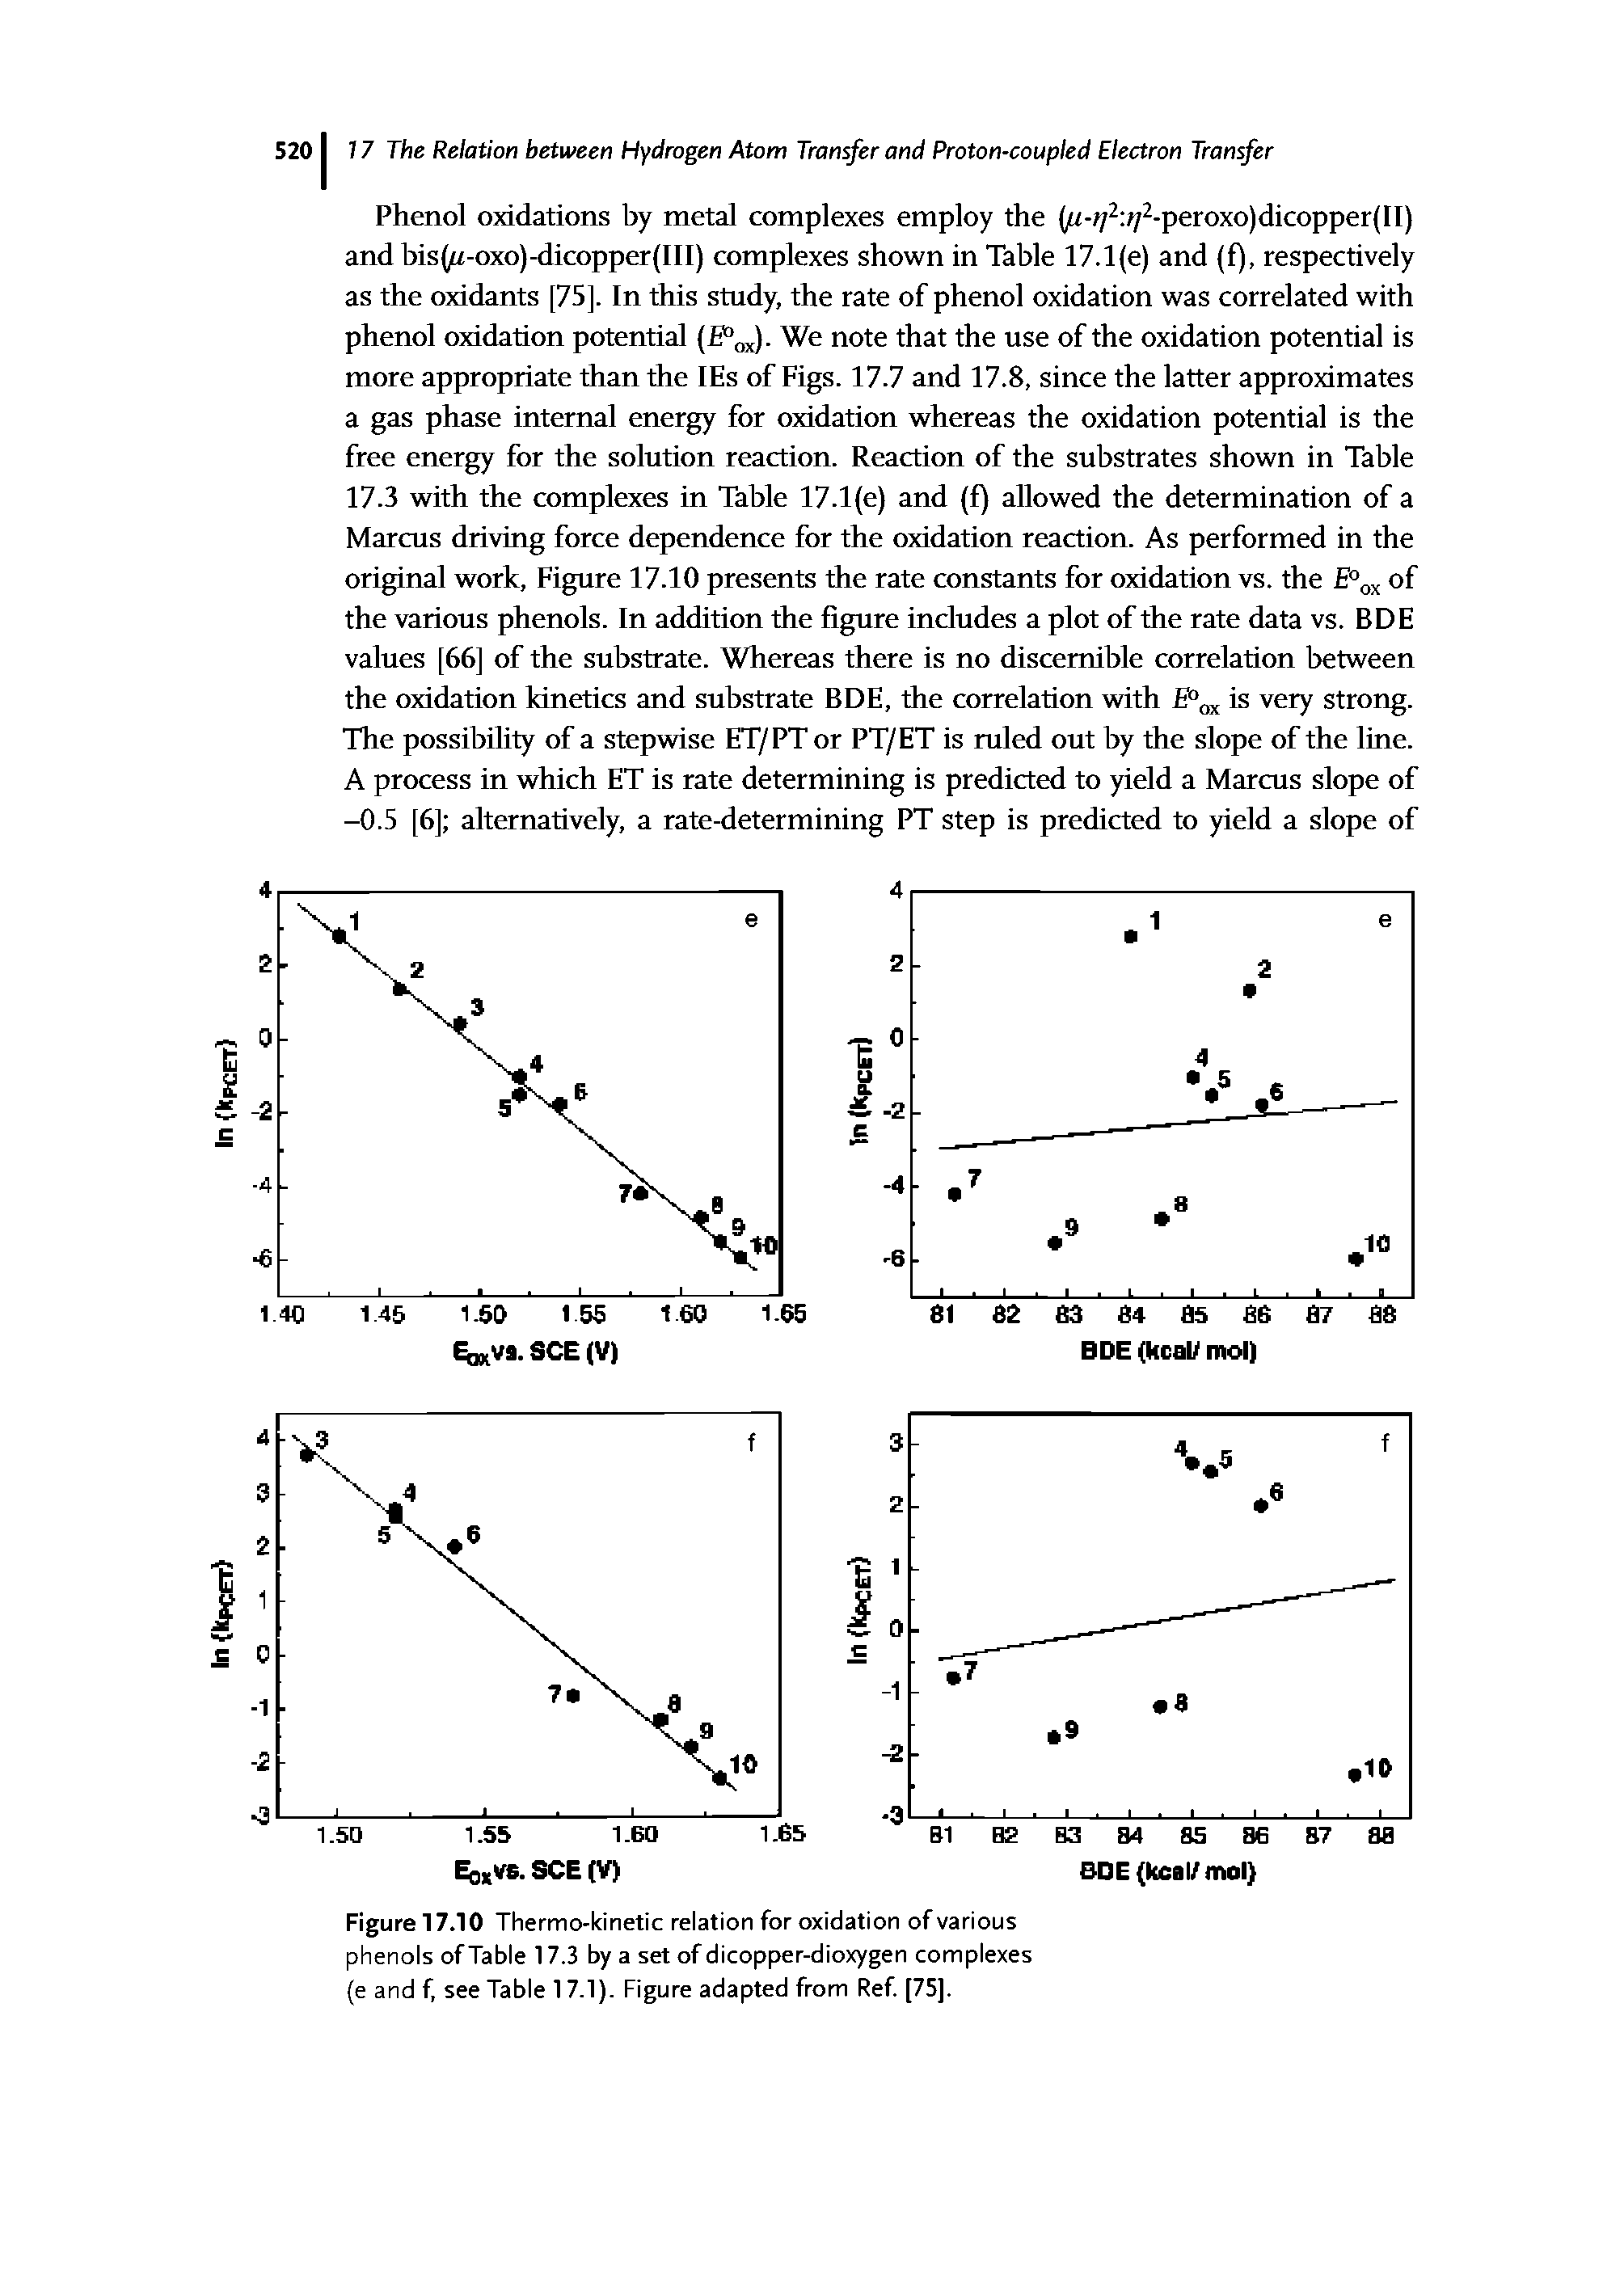 Figure 17.10 Thermo-kinetic relation for oxidation of various phenols of Table 17.3 by a set of dicopper-dioxygen complexes (e and f, see Table 17.1). Figure adapted from Ref [75].